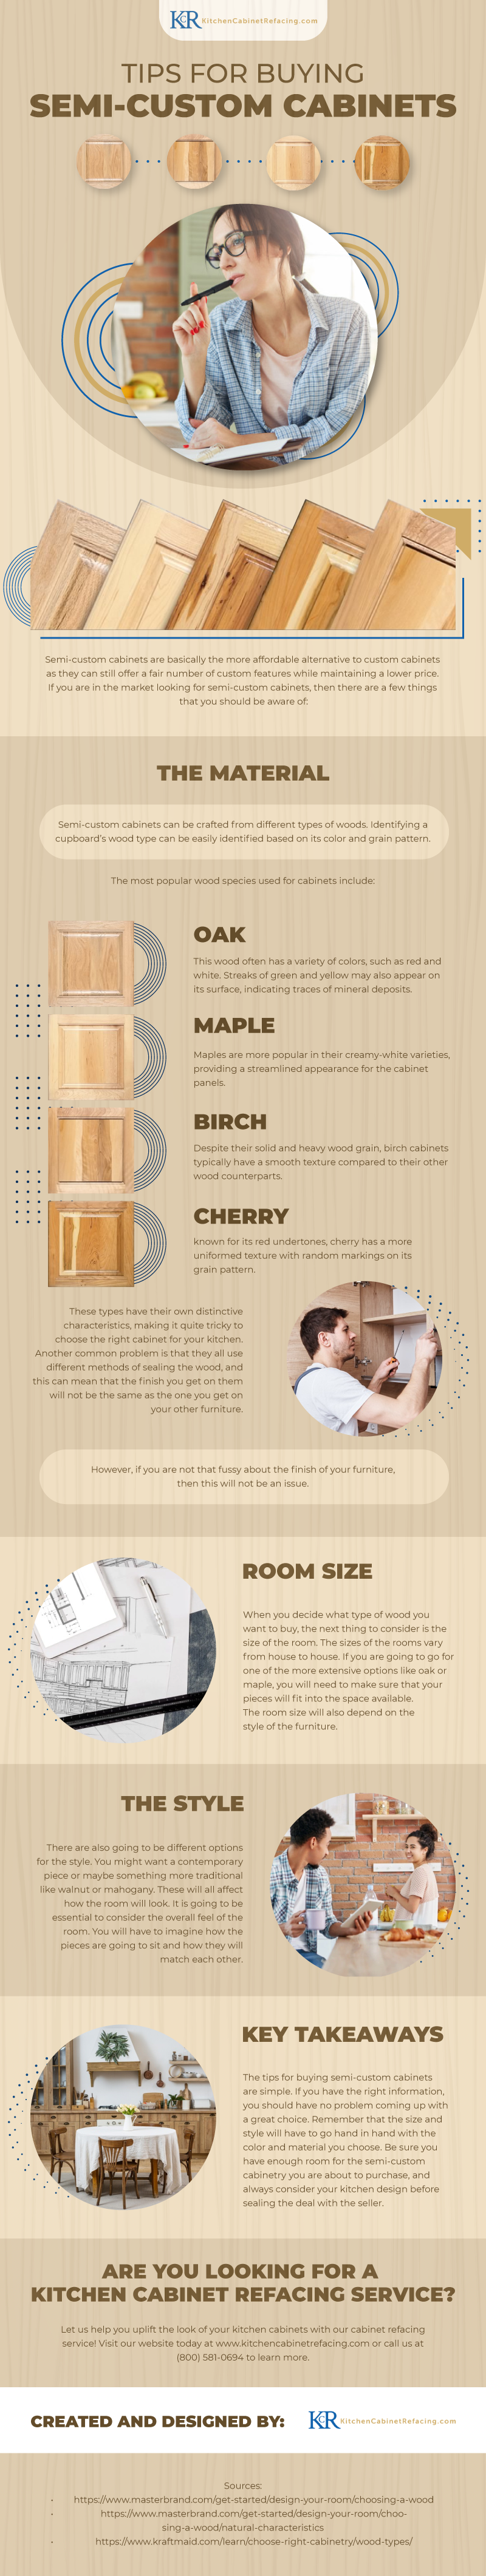 Tips_for_Buying_Semi_Custom_Cabinets_infographic_image